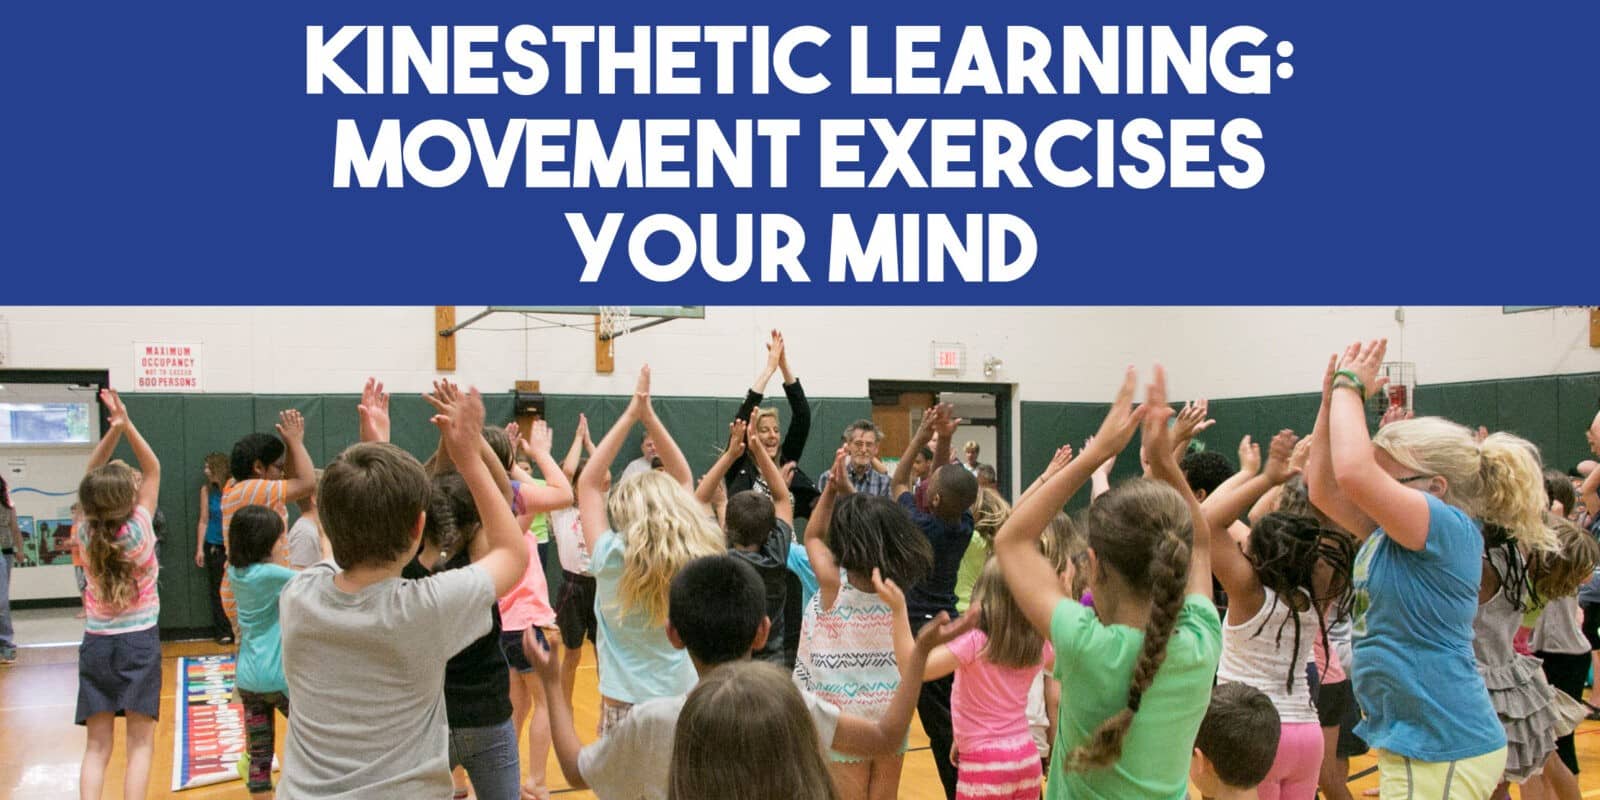 research about kinesthetic learning style